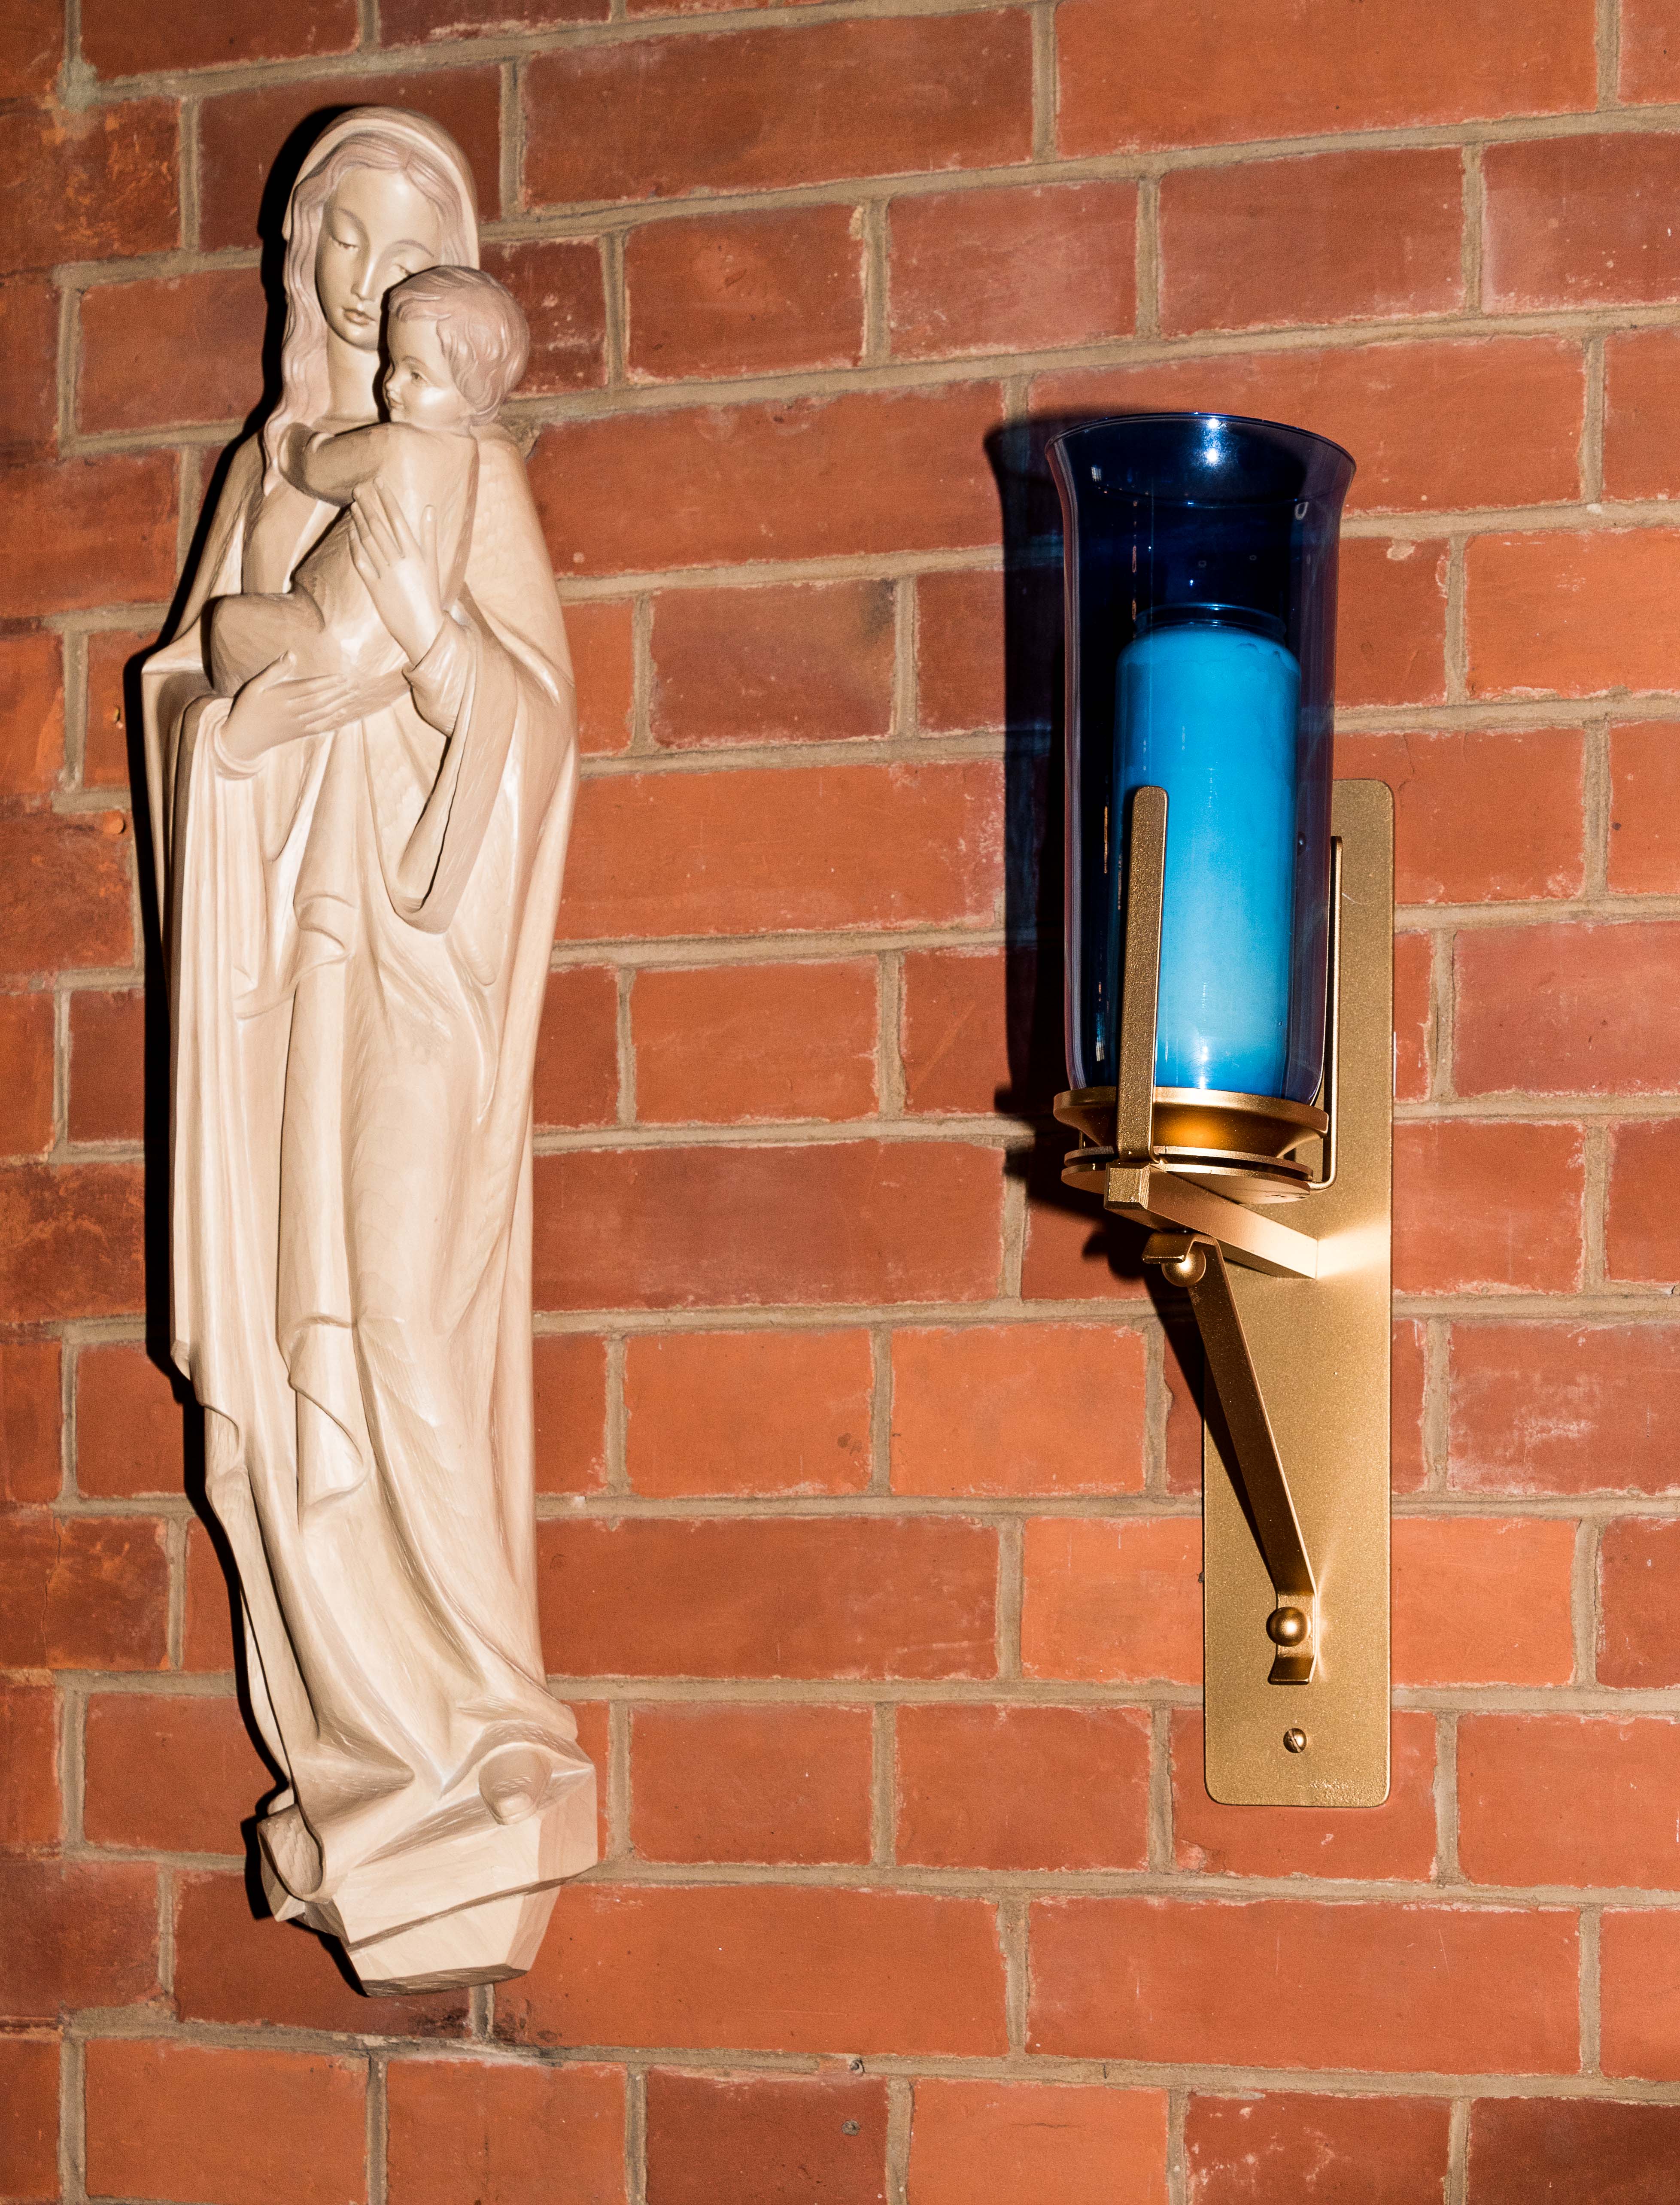 Holy Trinity Church: Photograph of installed Statue and Lamp